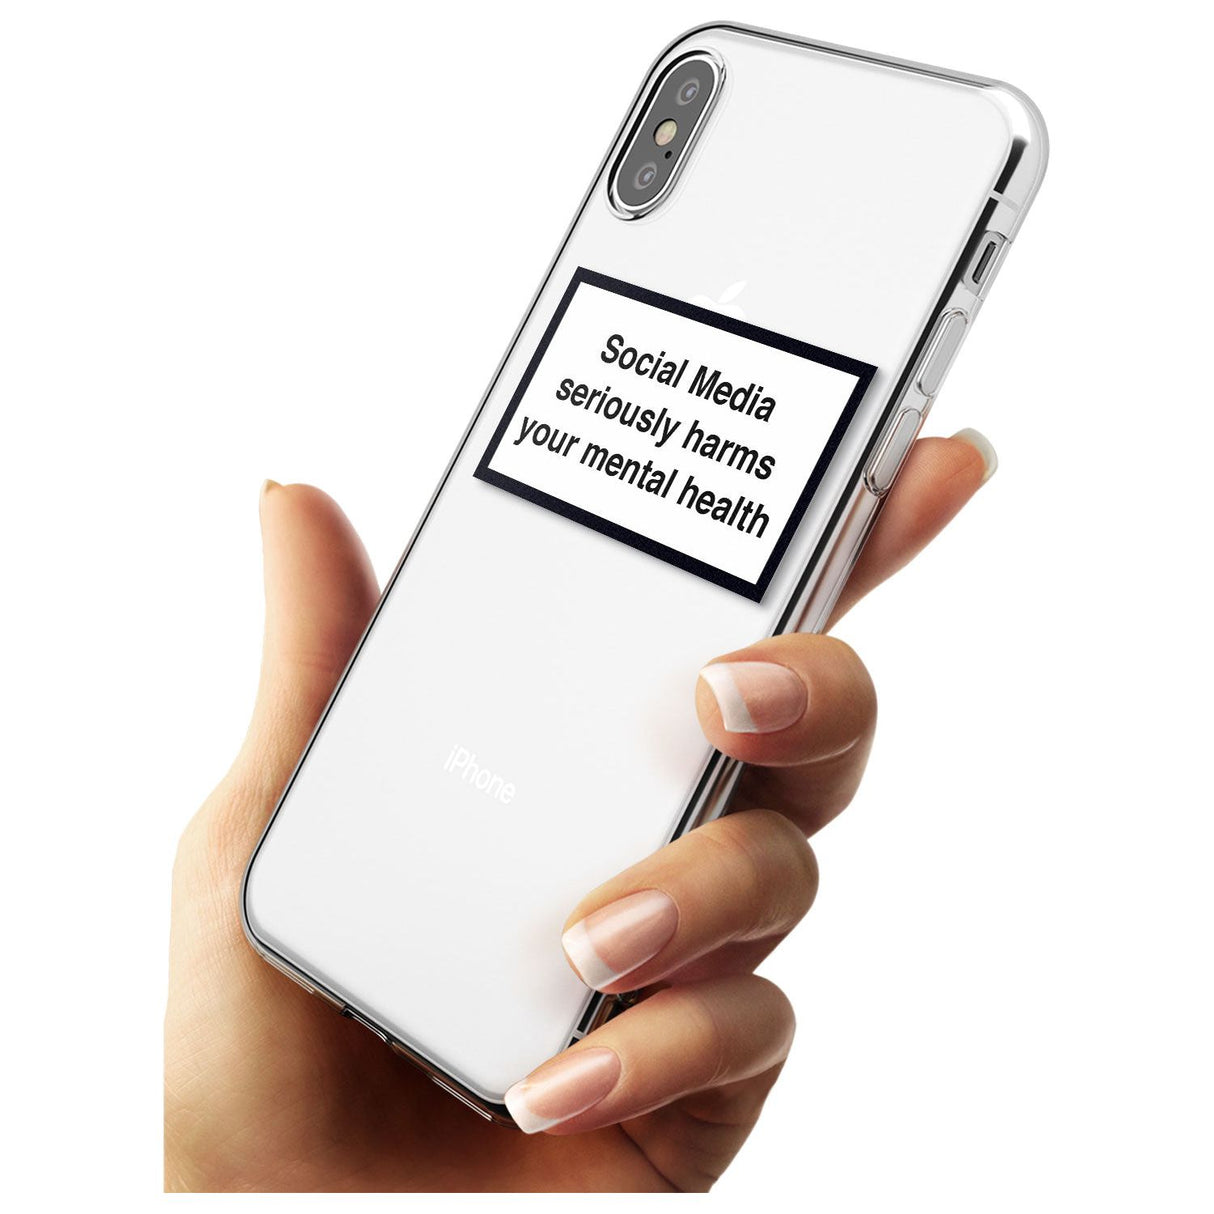 Social Media Quote iPhone Case   Phone Case - Case Warehouse